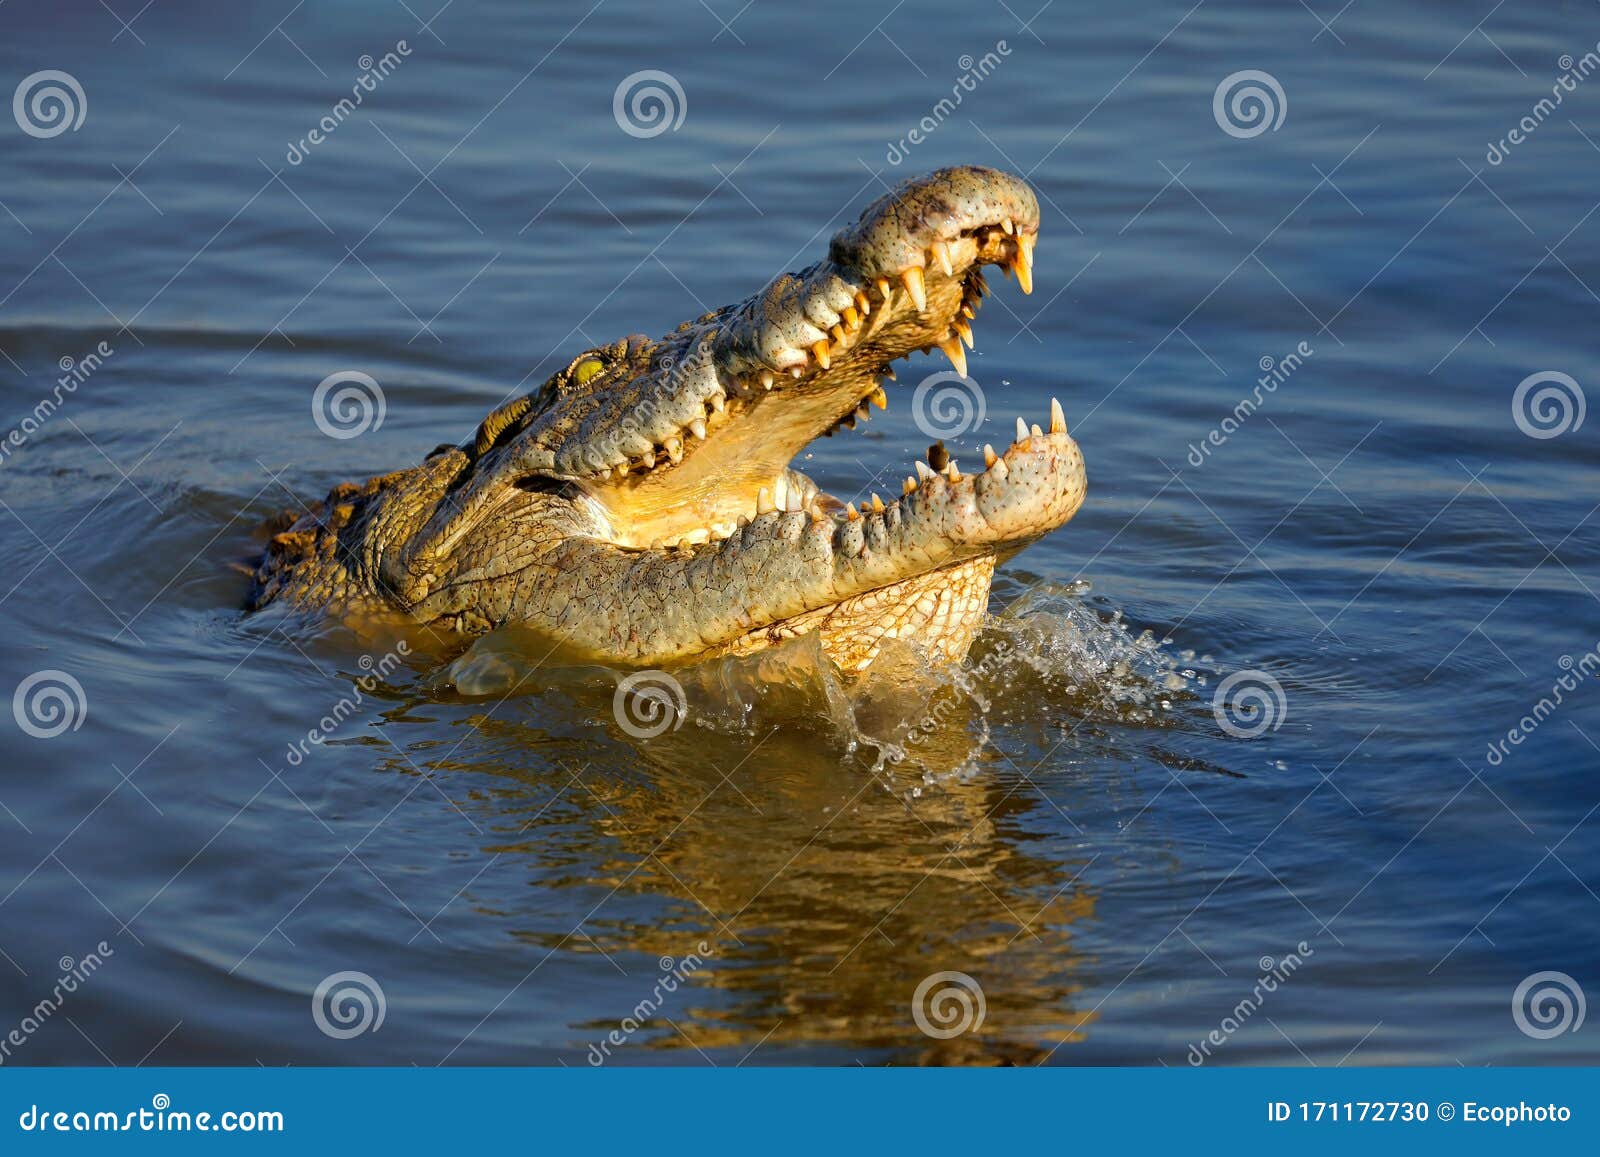 nile crocodile with open jaws